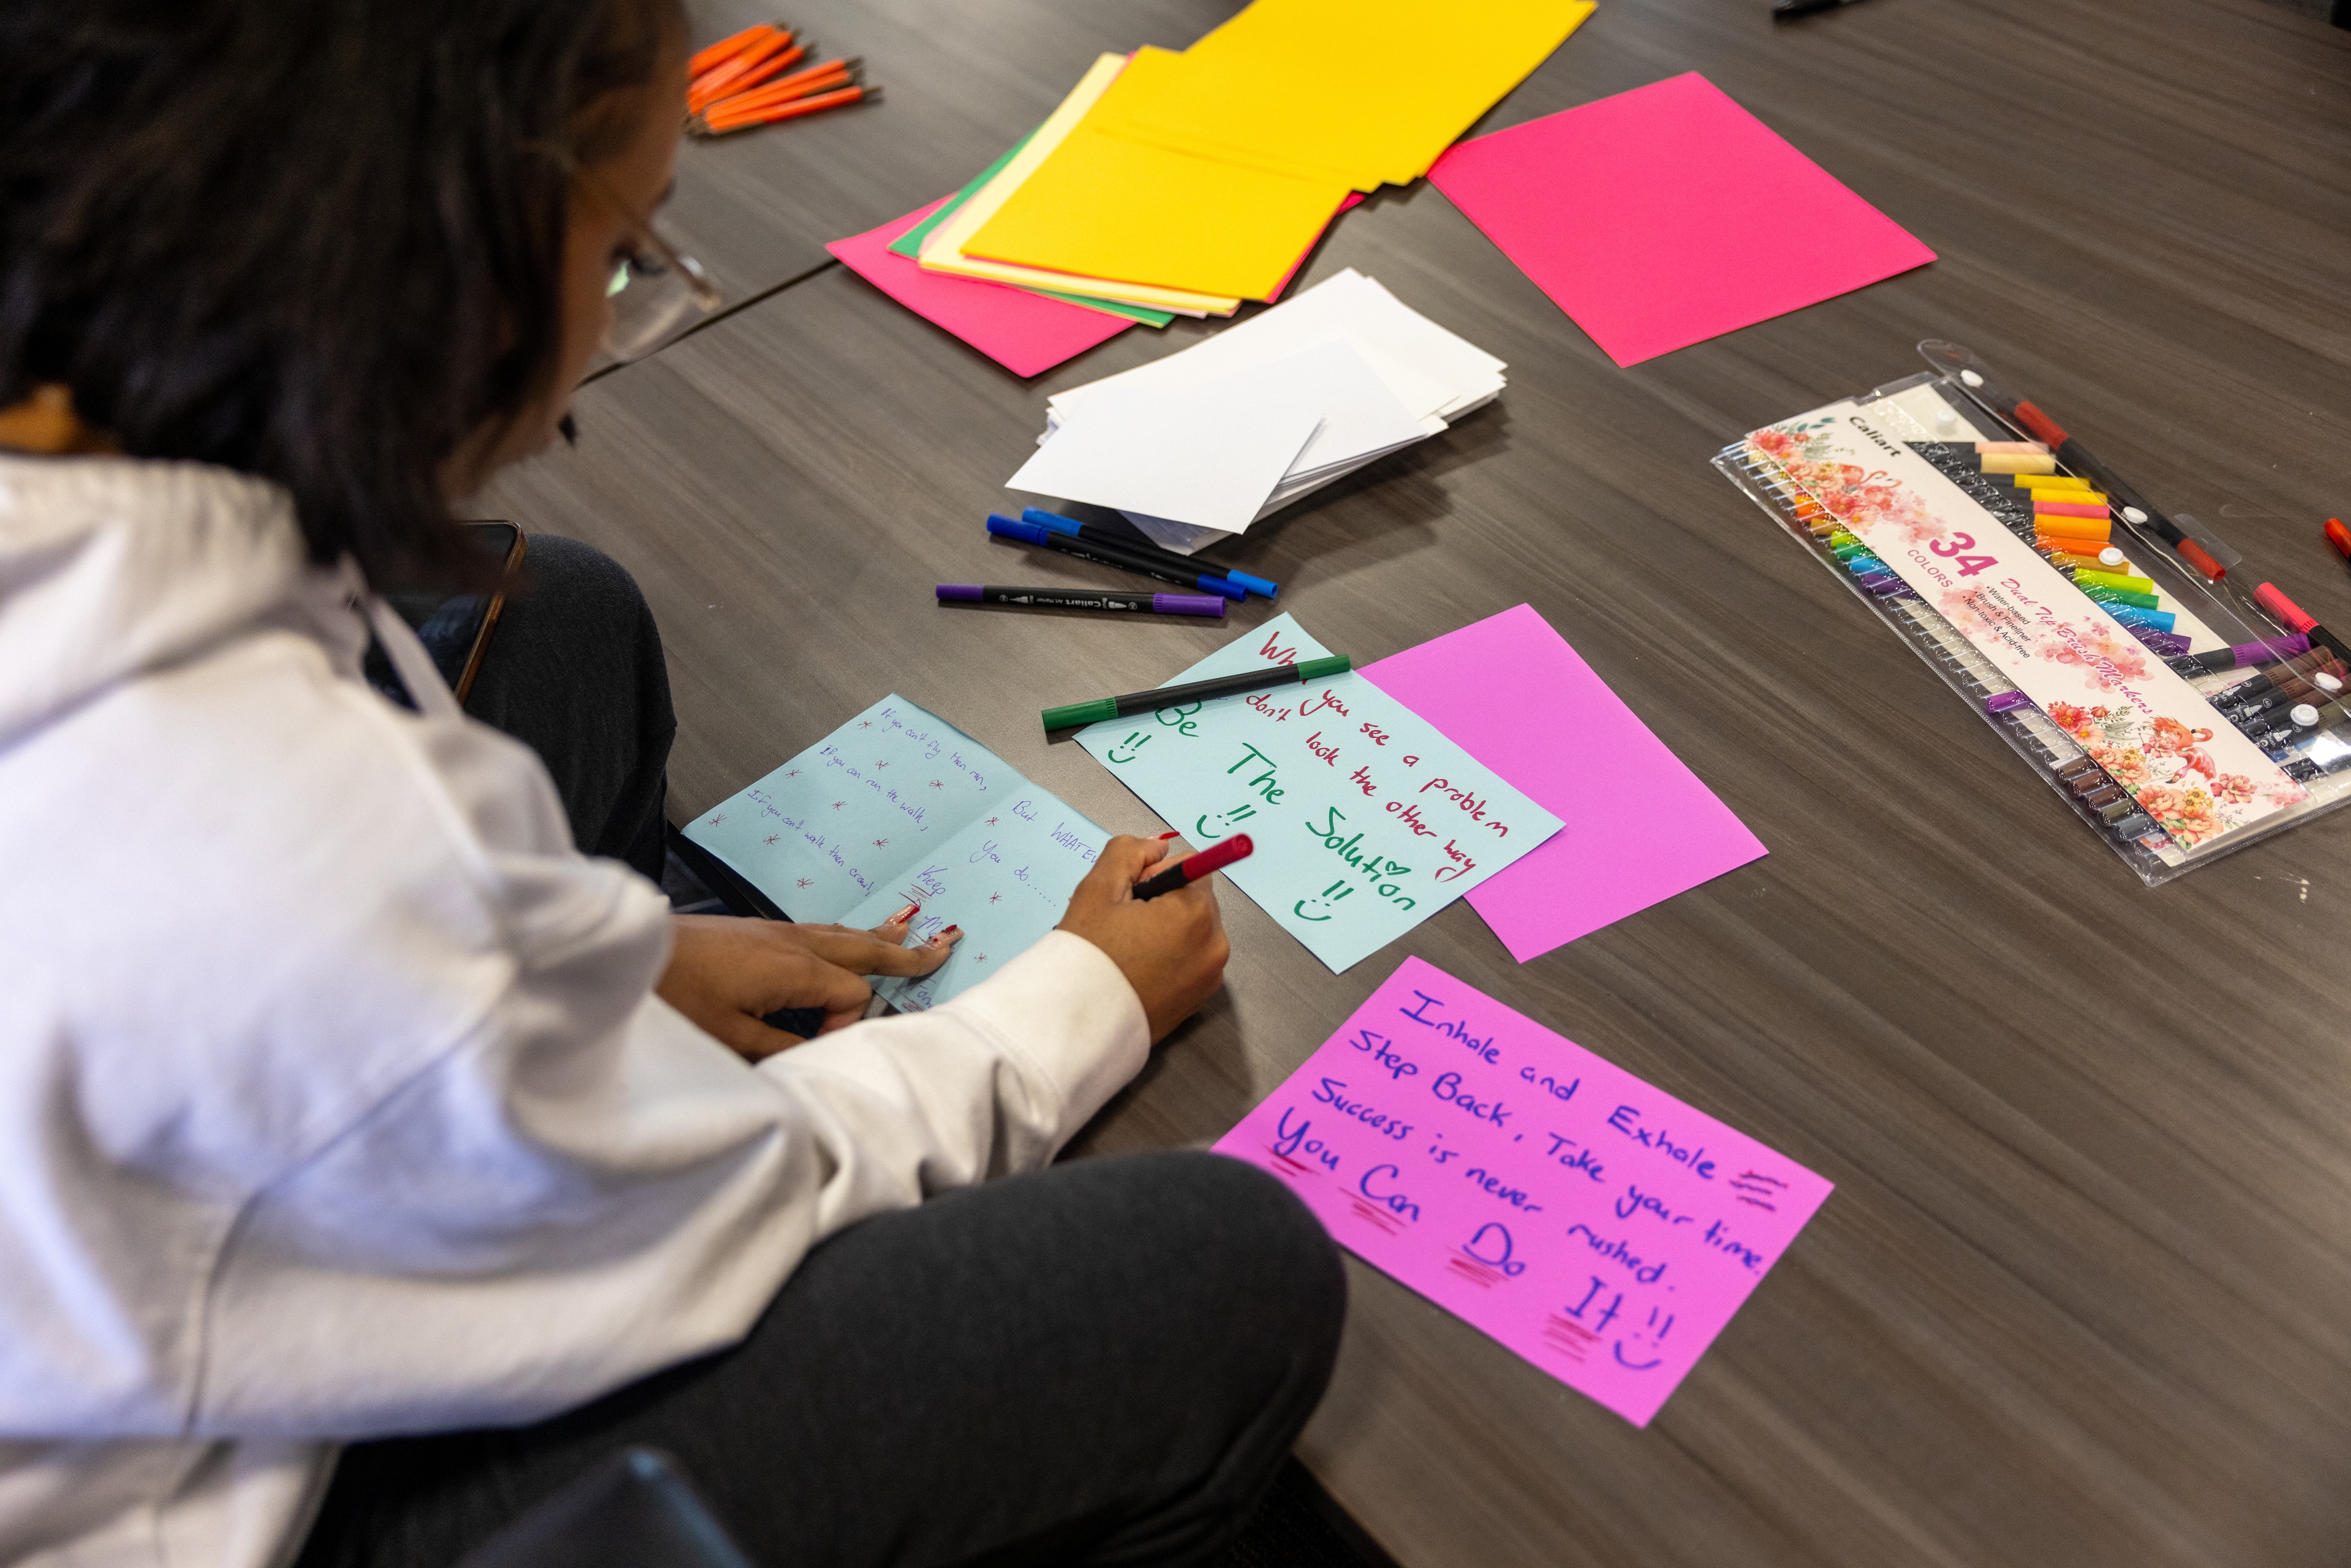 A BGSU student using a marker and colored paper to create cards for others.